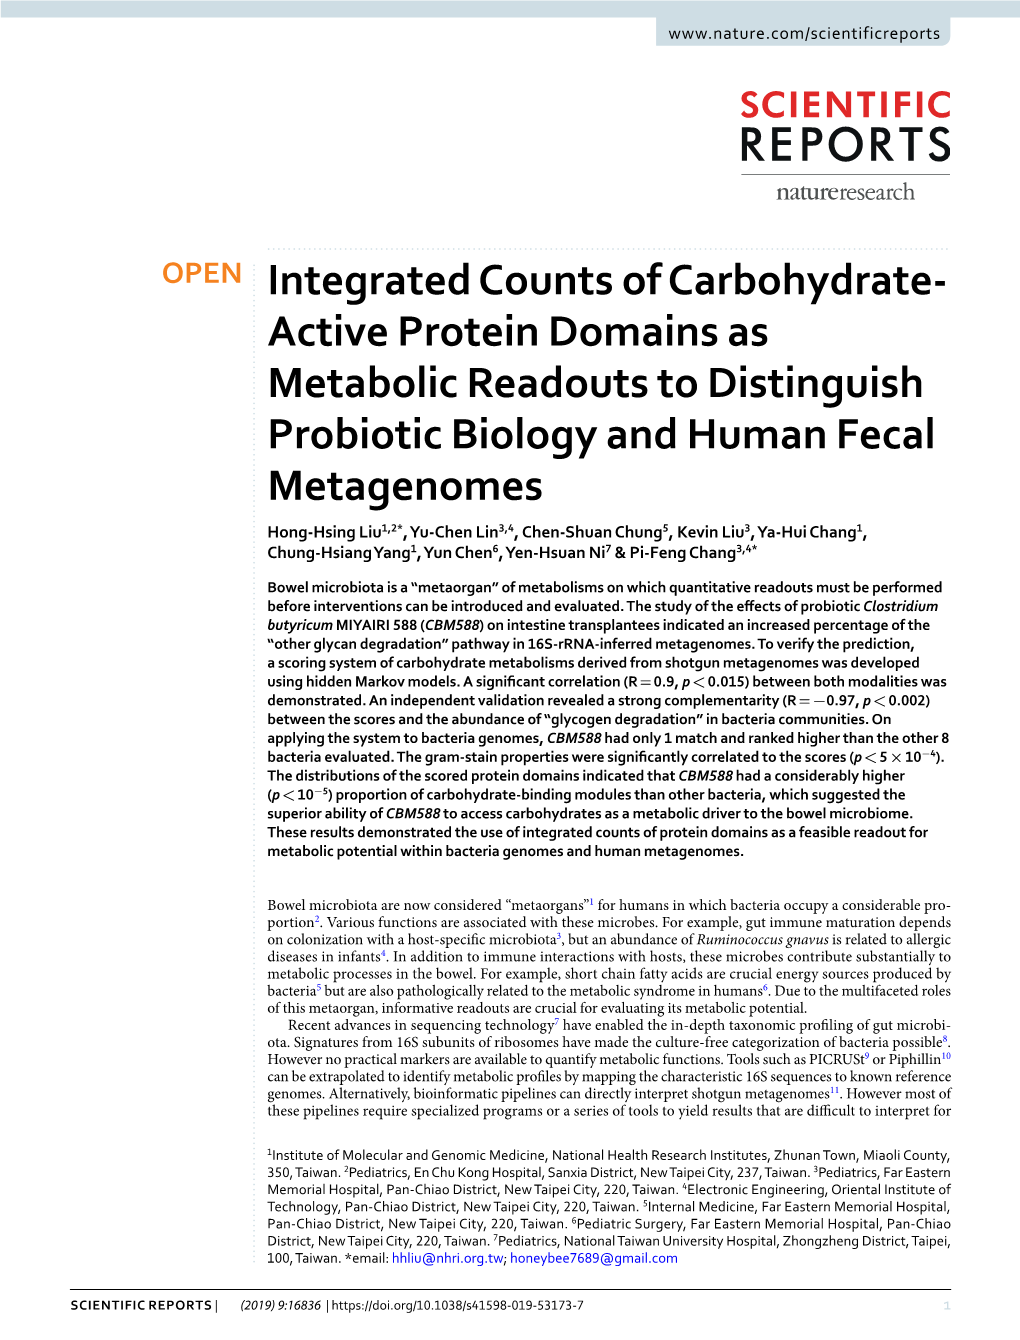 Integrated Counts of Carbohydrate-Active Protein Domains Afer Probability Analyses Were Conducted Using Hidden Markov Models